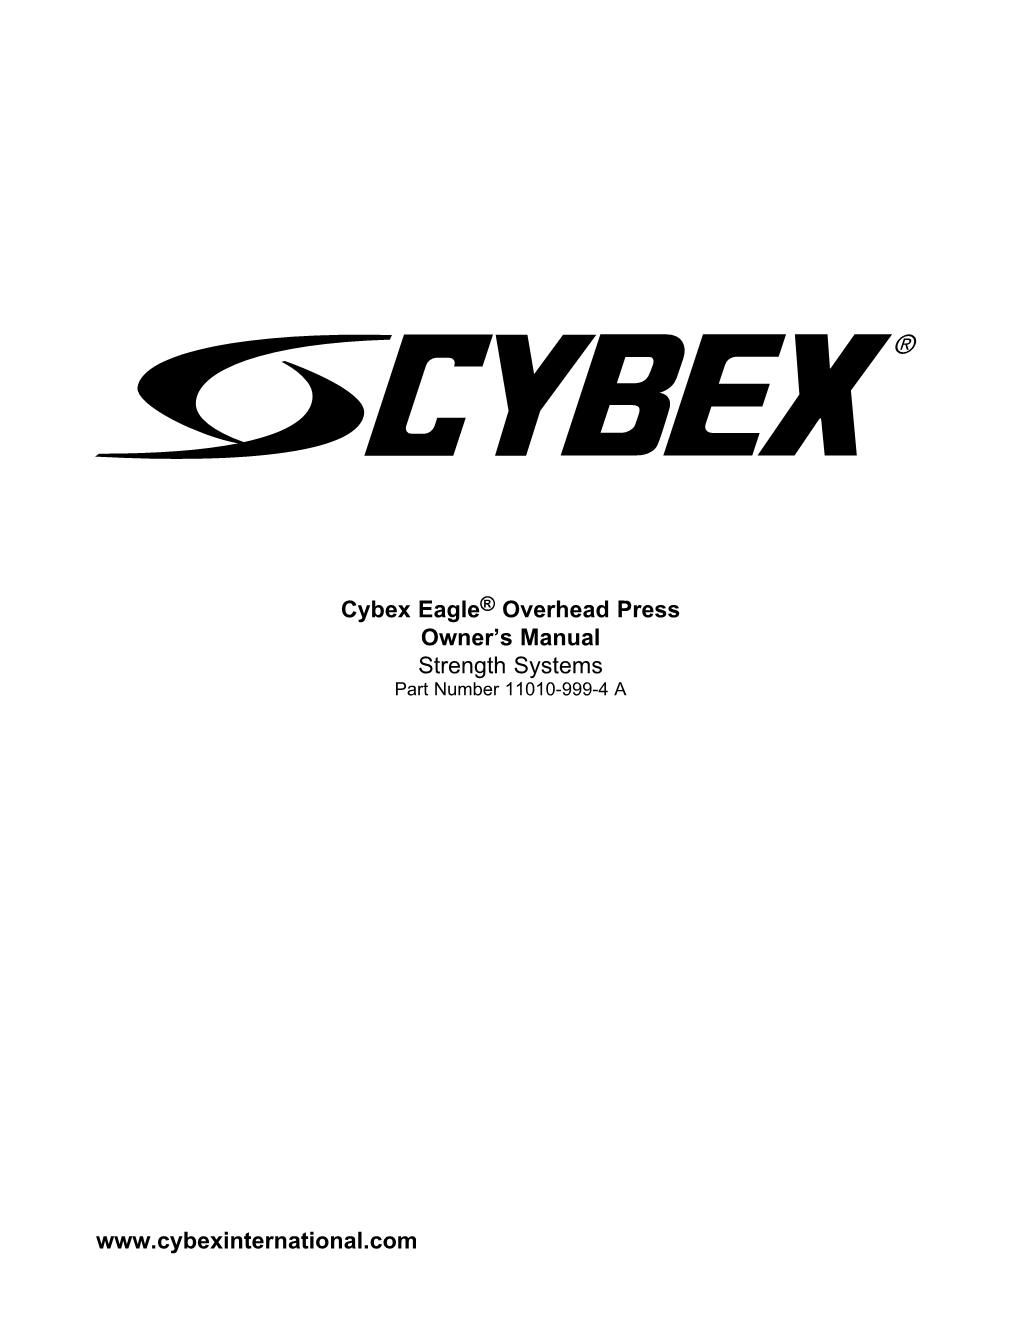 Cybex Eagle® Overhead Press Owner's Manual Strength Systems